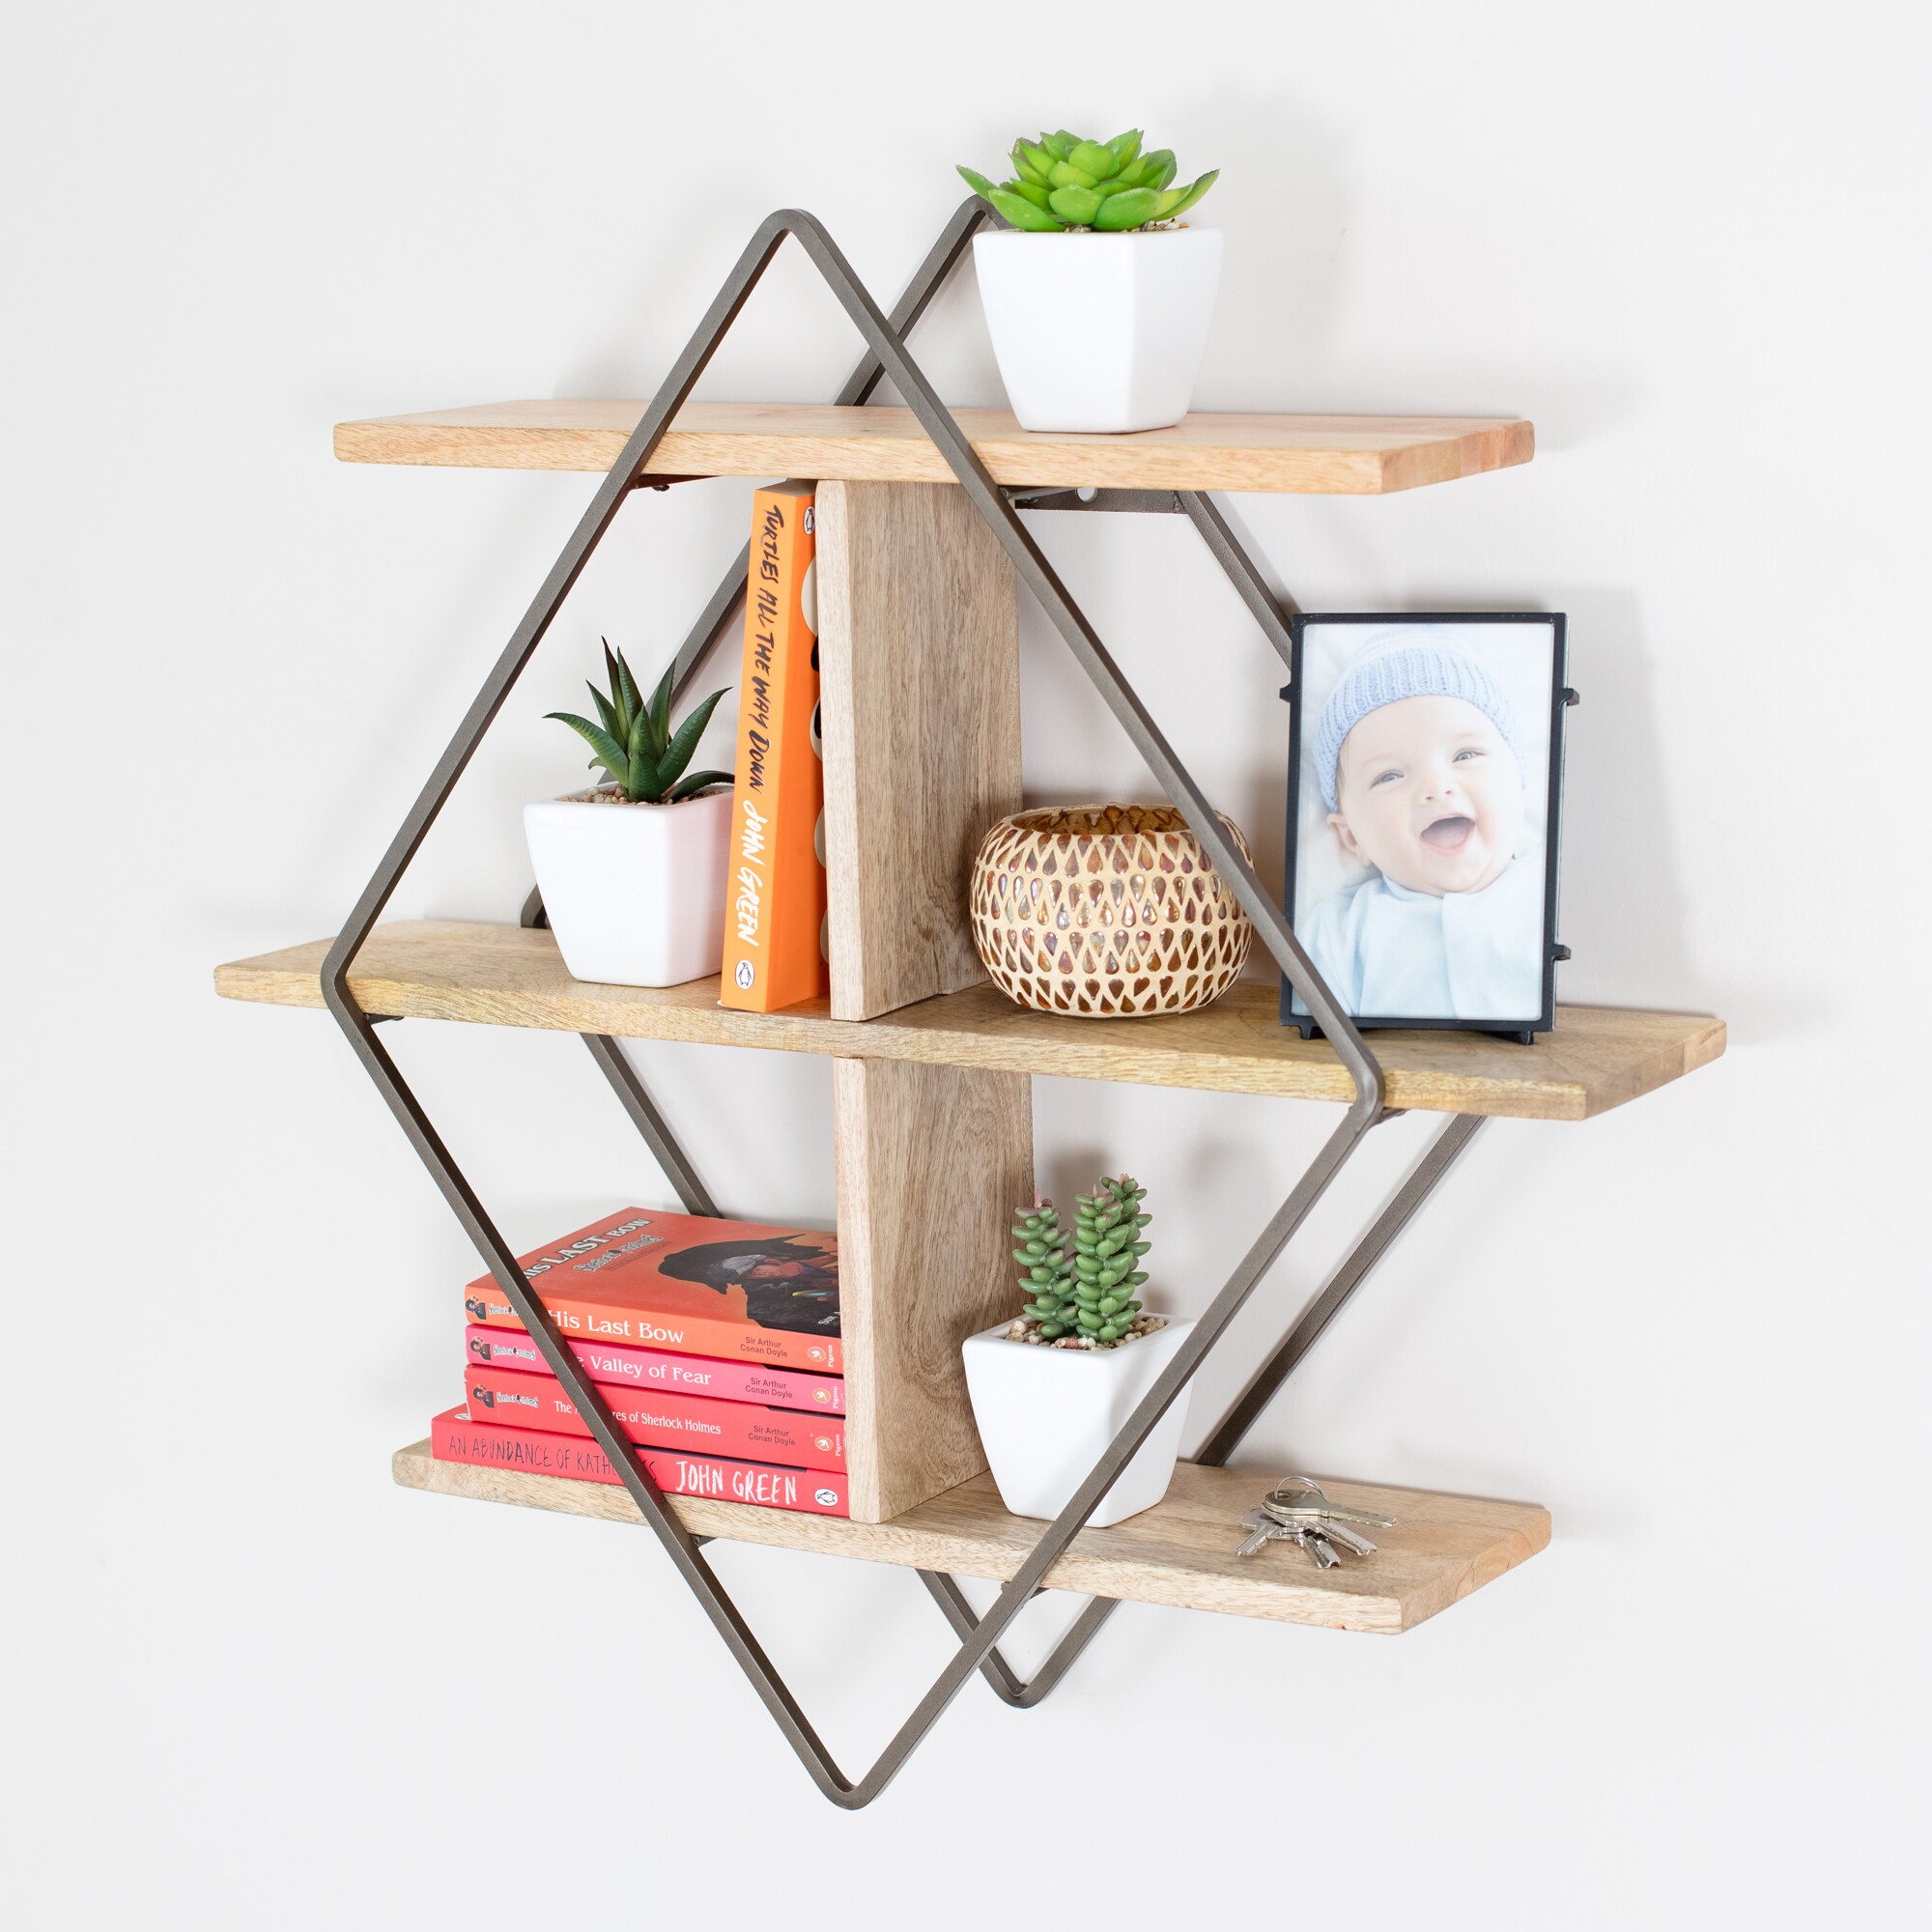 MH LONDON 24-in L x 6-in D x 24-in H Bronze Wood Angular Floating Shelf ...